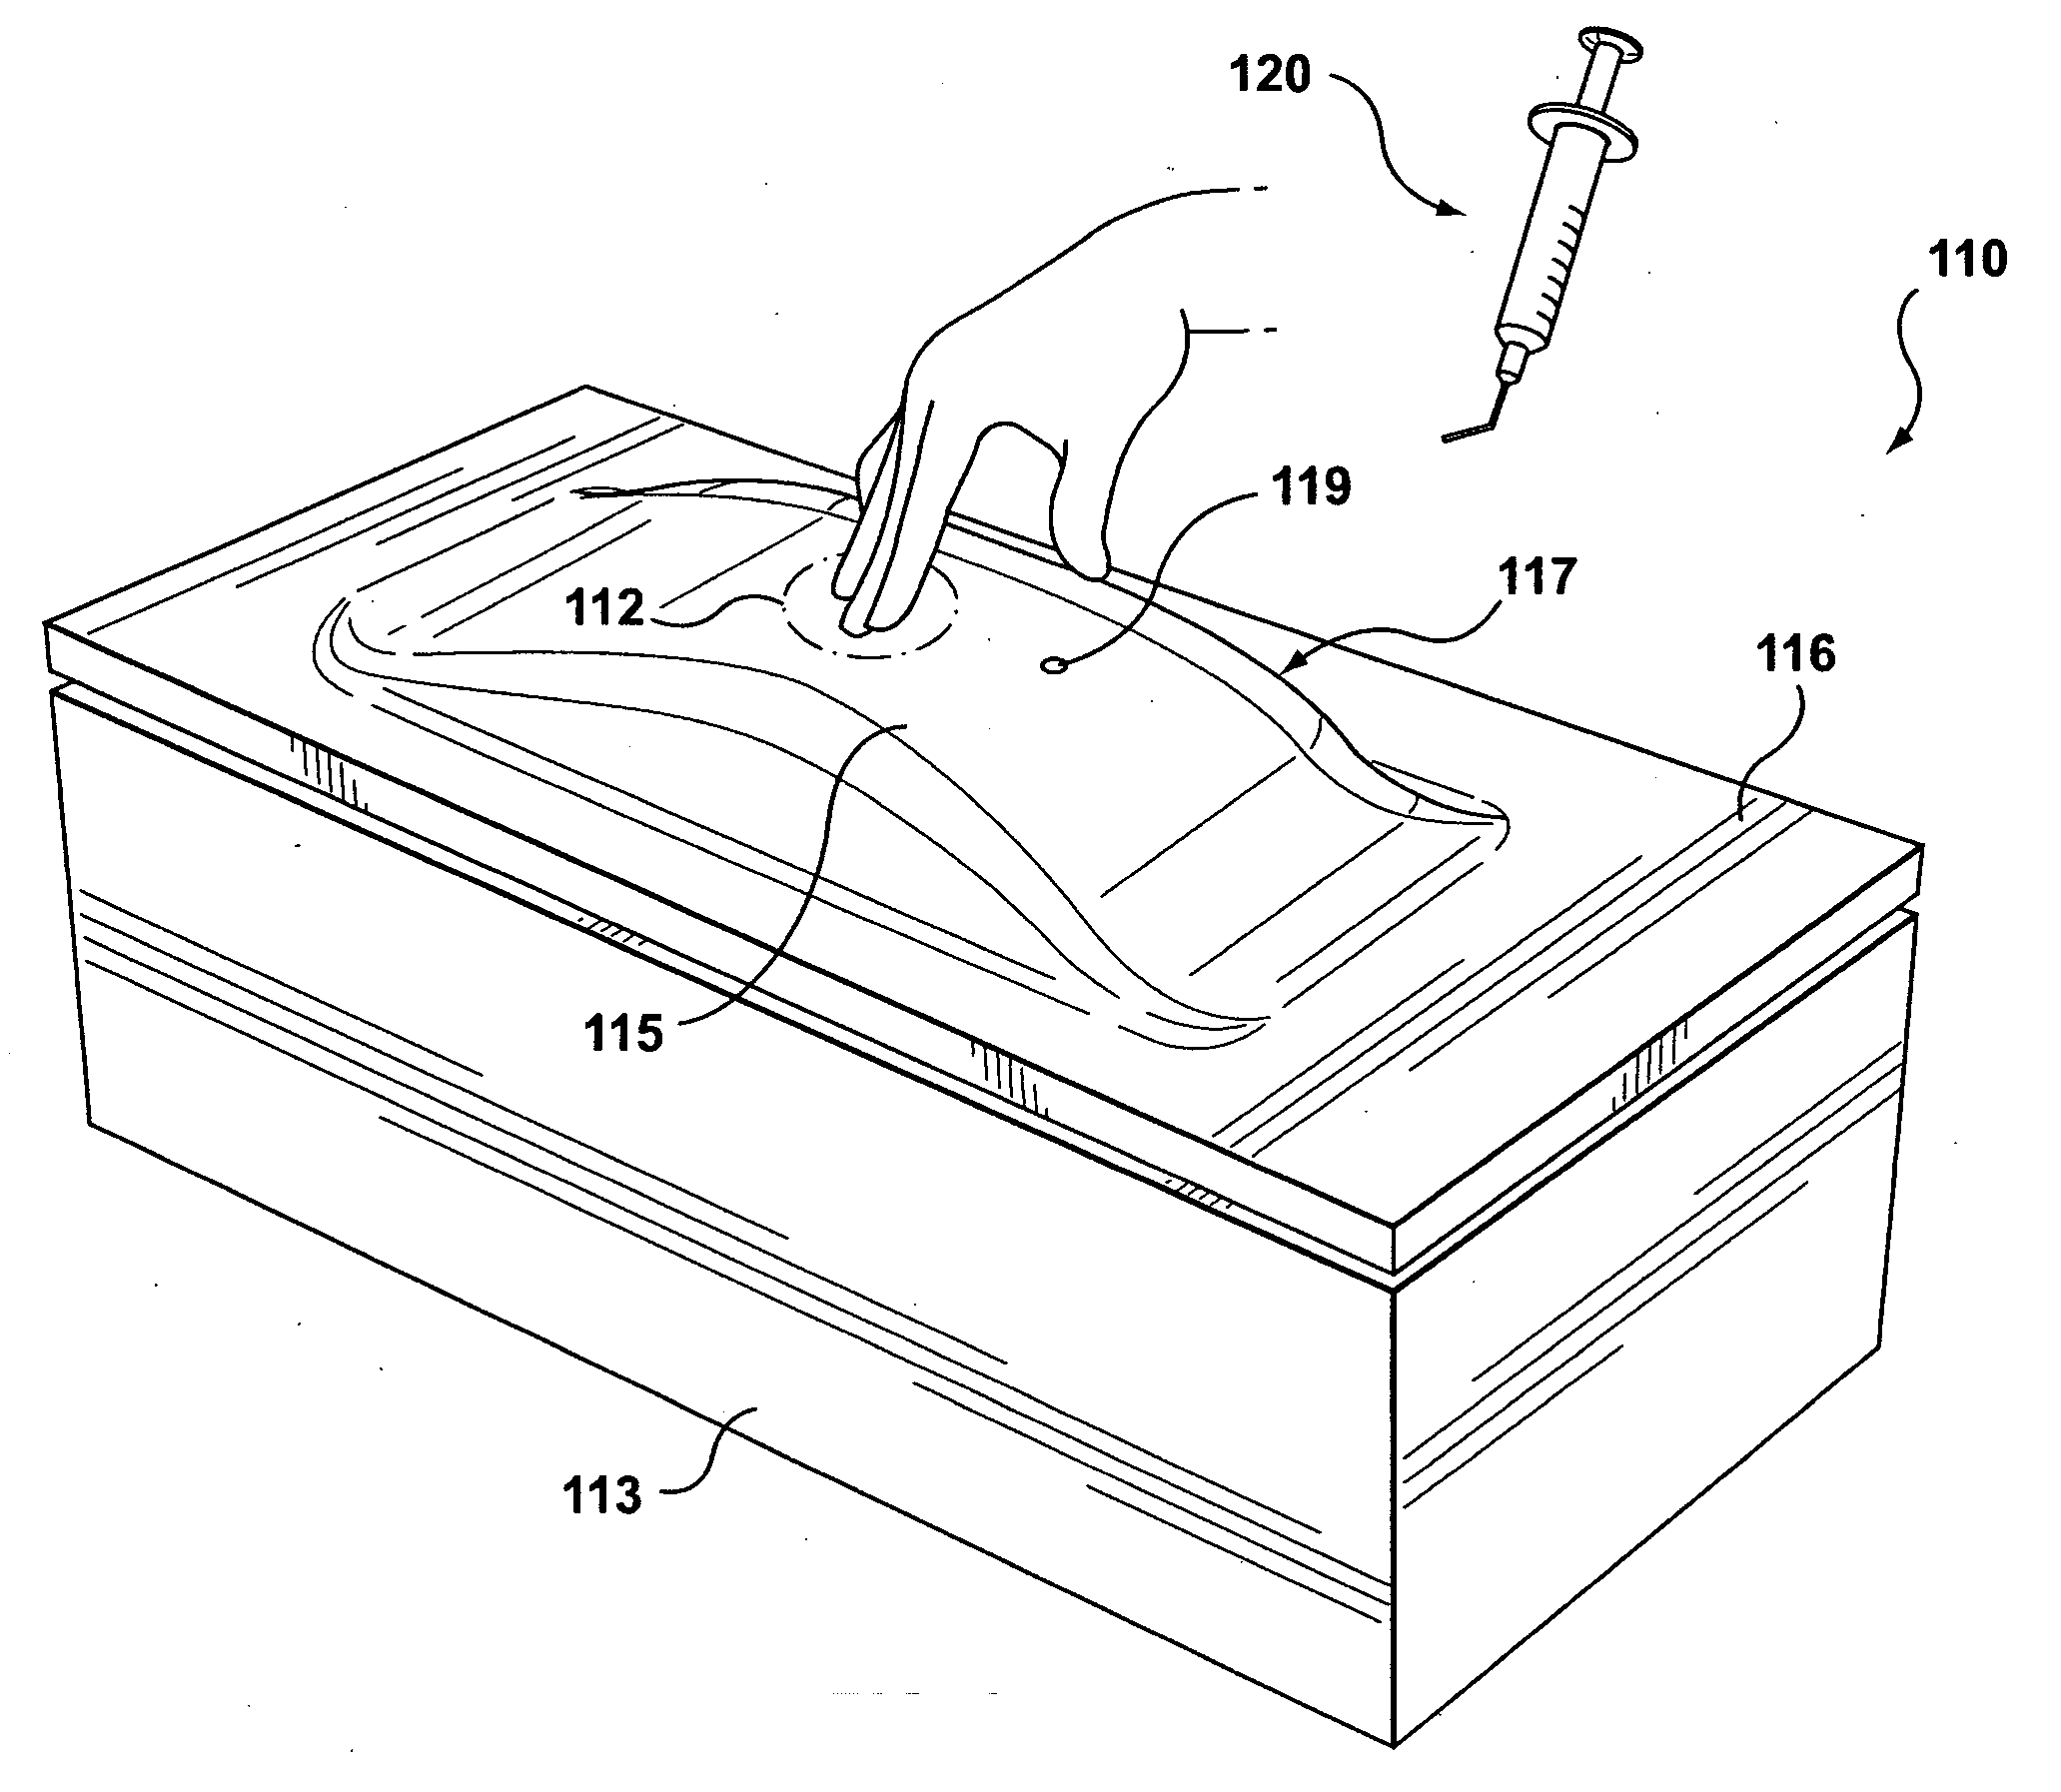 System for Displaying and Interacting With Palpatable Feature